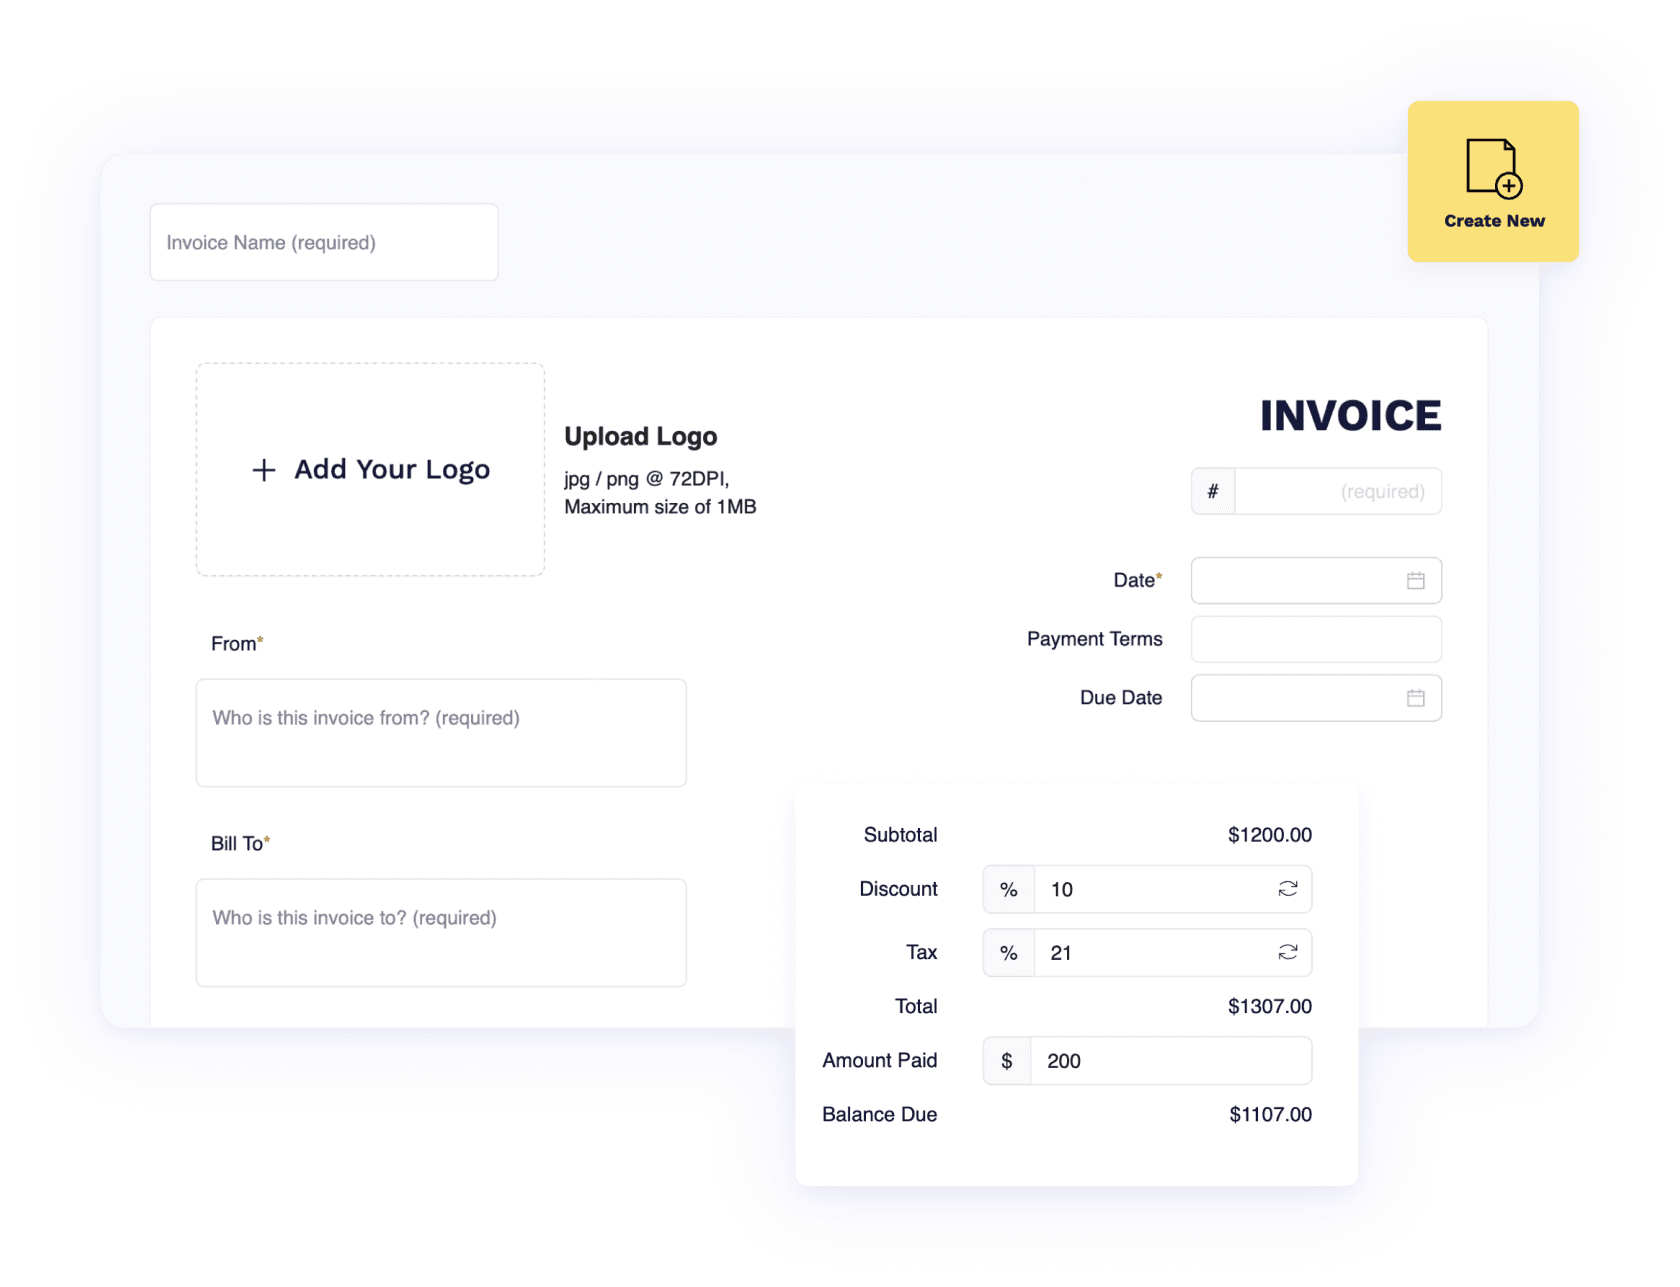 Generate invoices in seconds - Owledge